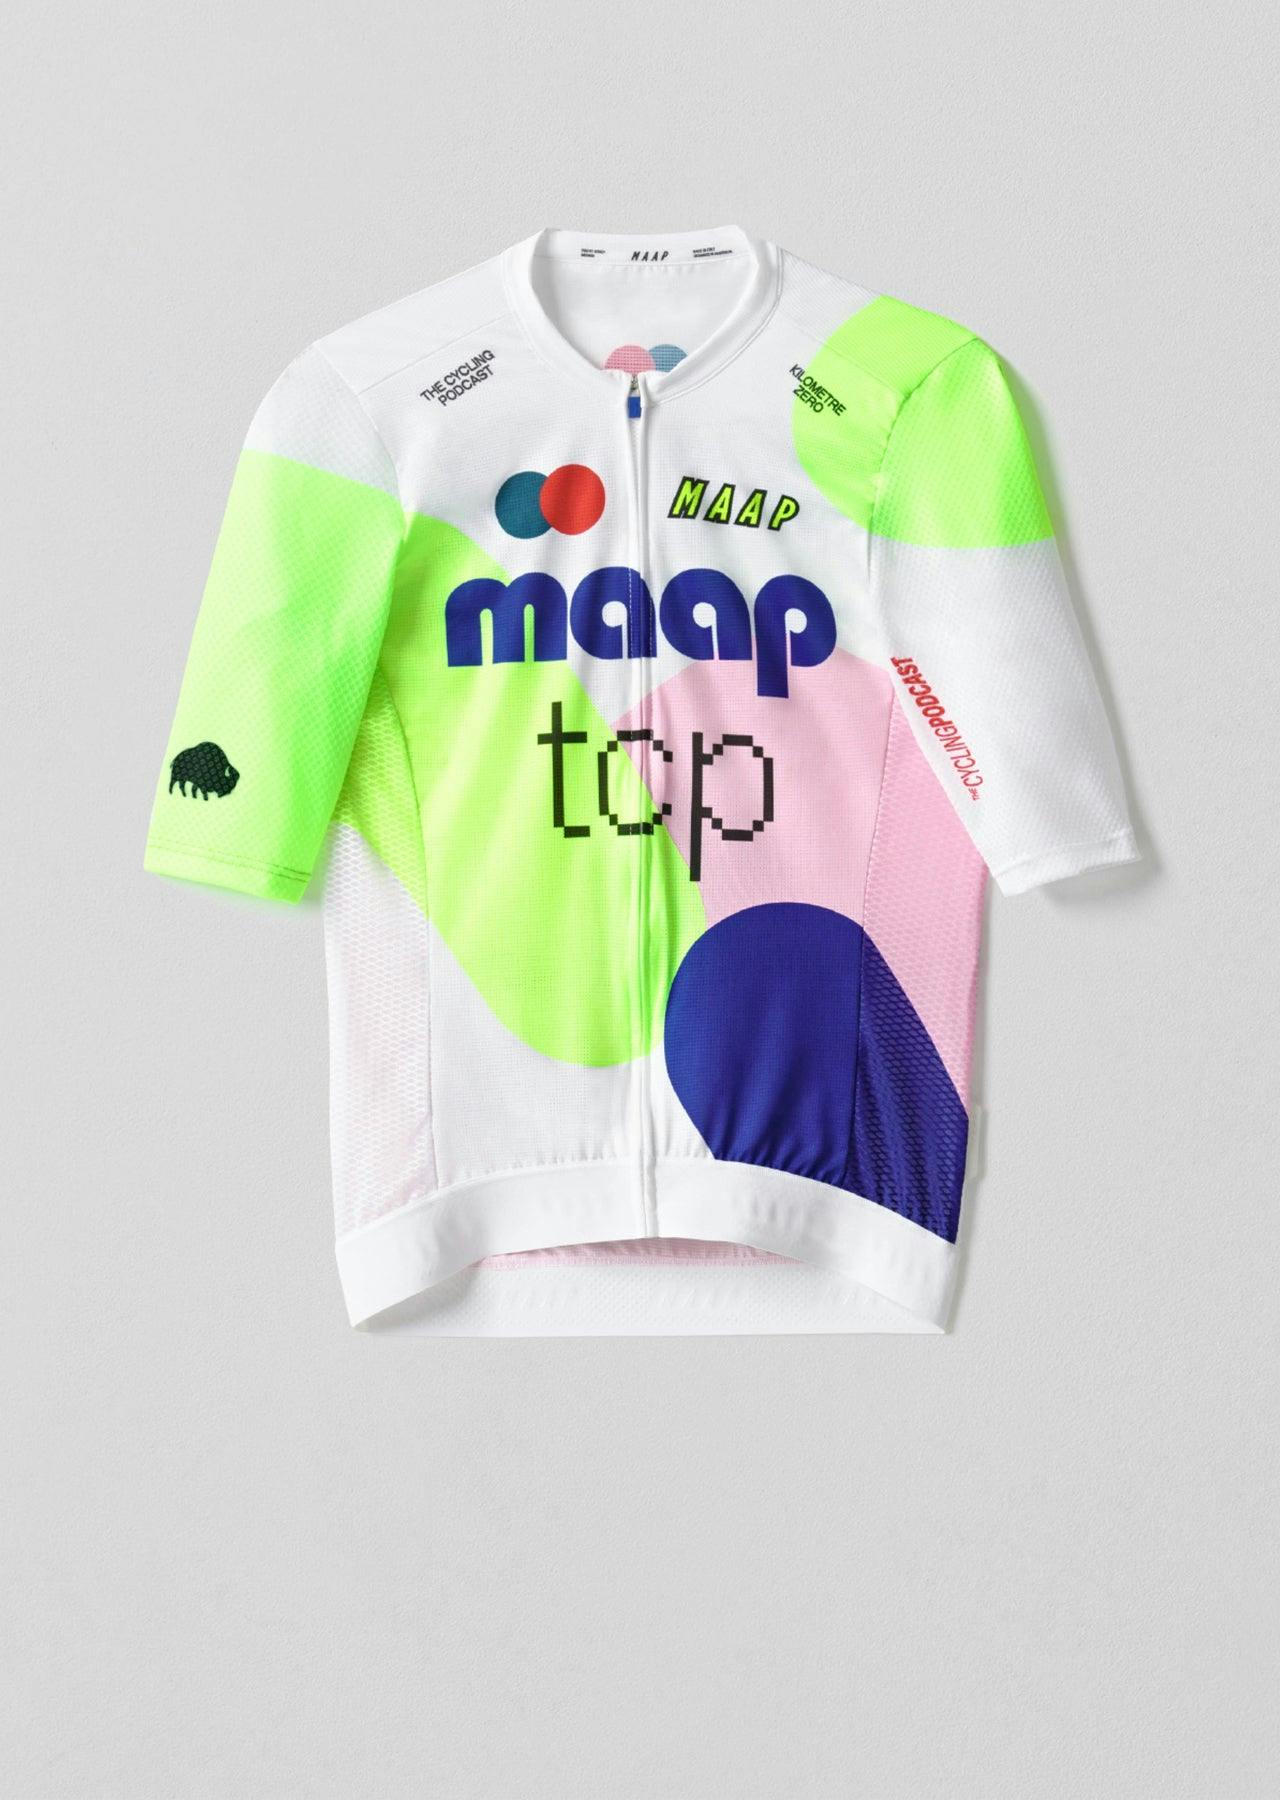 MAAP x The Cycling Podcast Women's Jersey